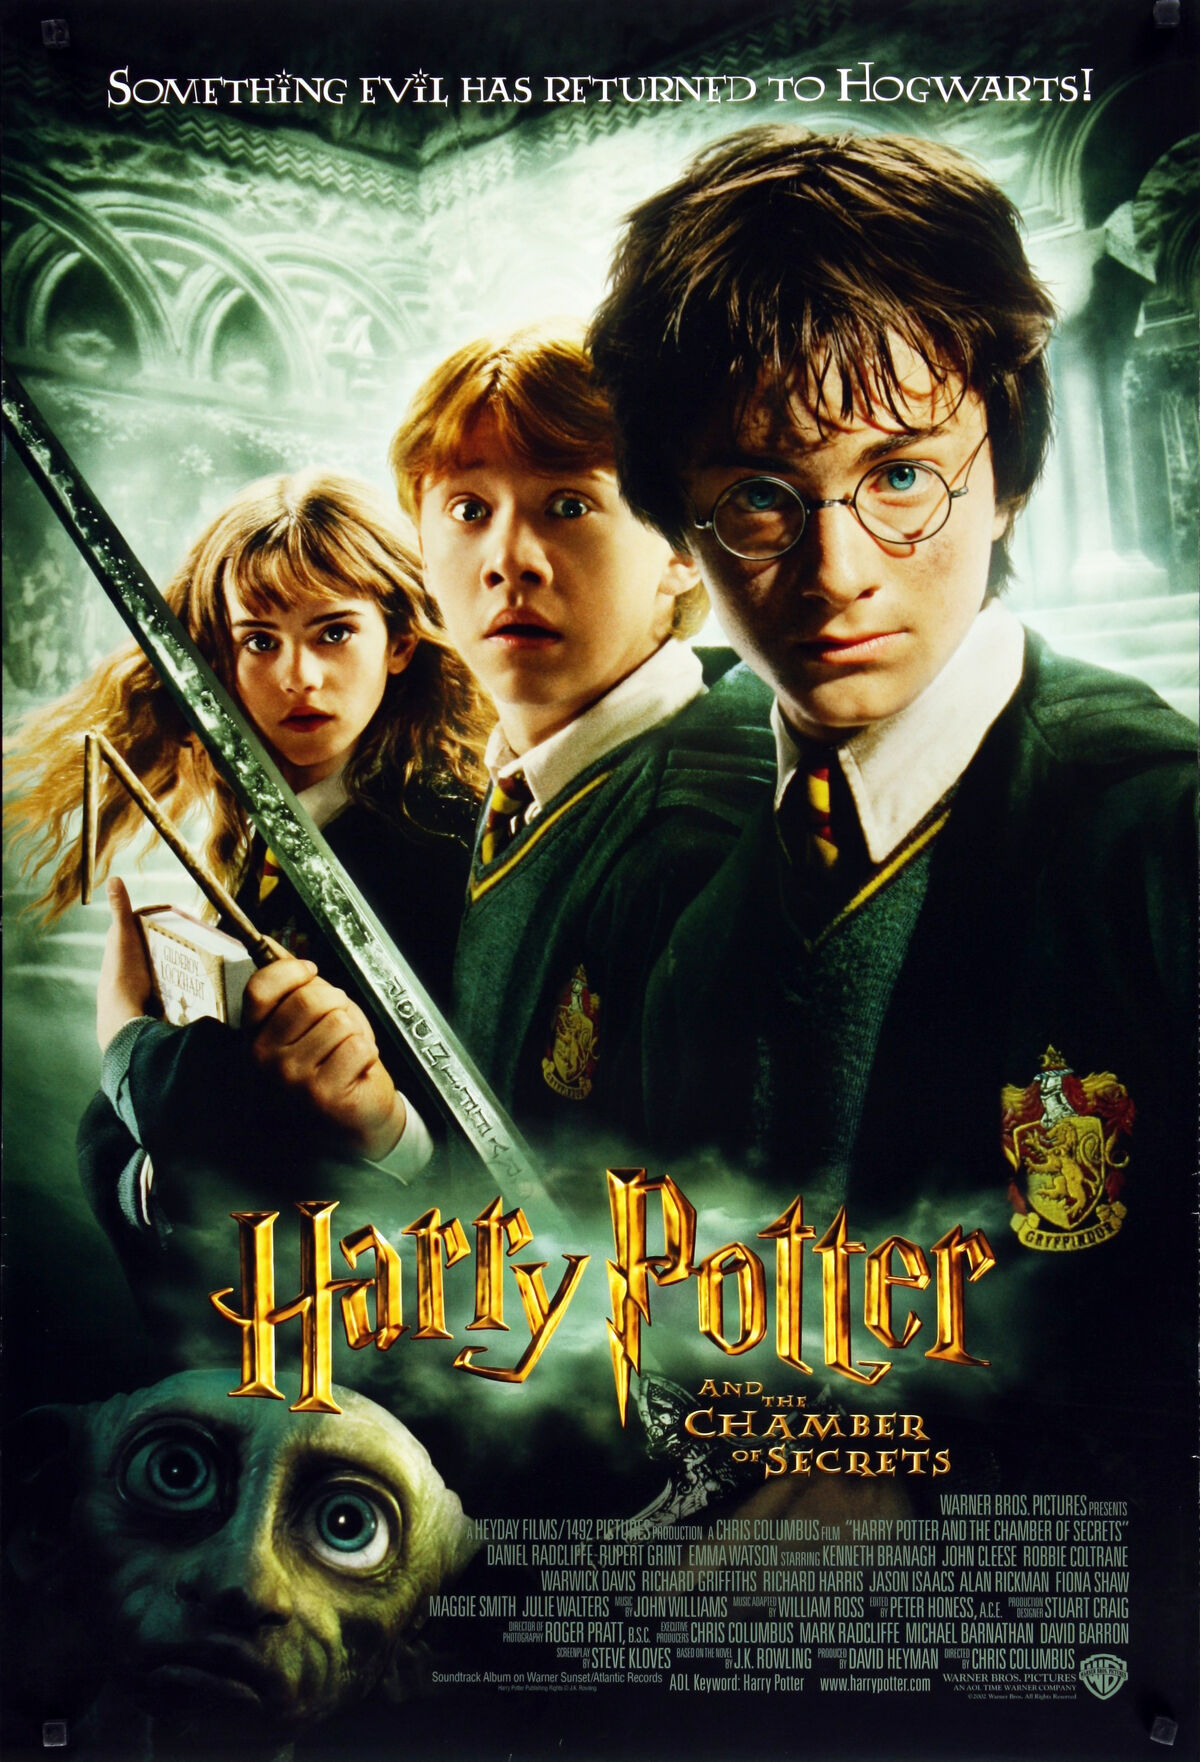 Harry Potter and the Chamber of Secrets (film) | Harry Potter Wiki